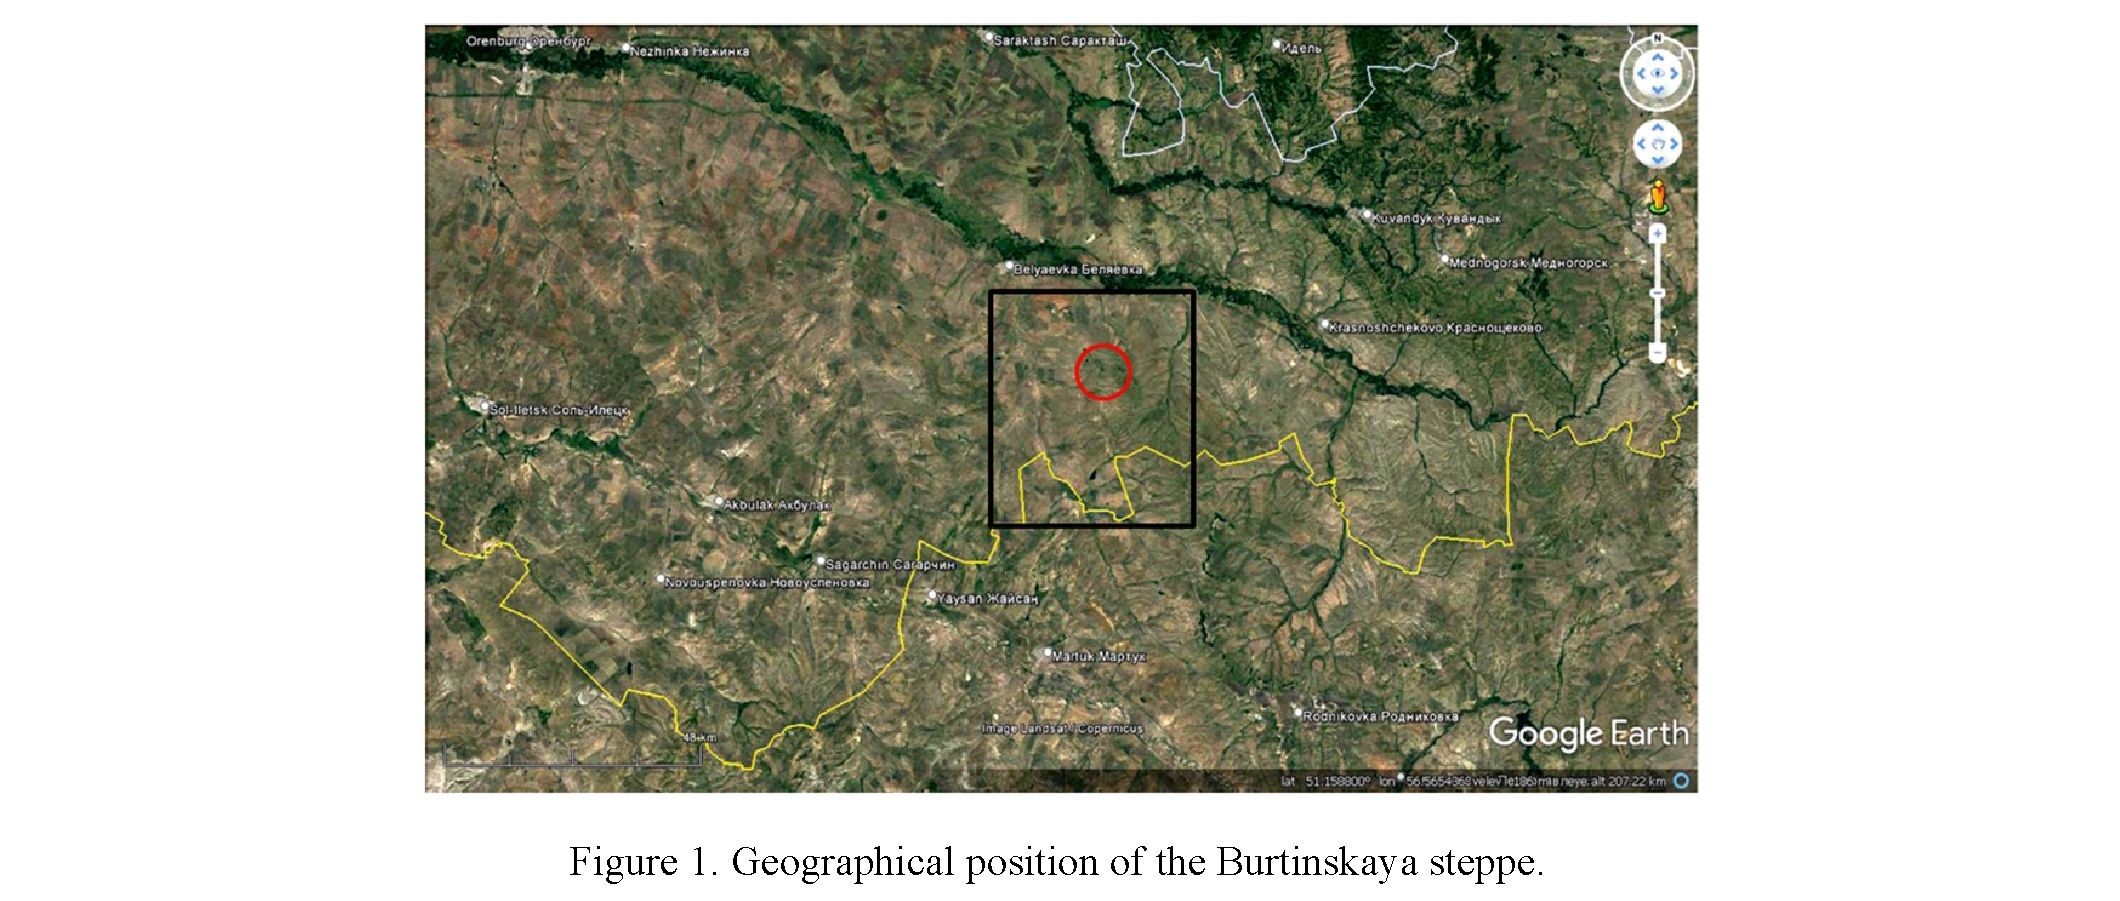 Hydrothermal conditions of the temporal variability of the phytoproductive functioning: case study of the Burtinskaya steppe landscape (Southern Urals)